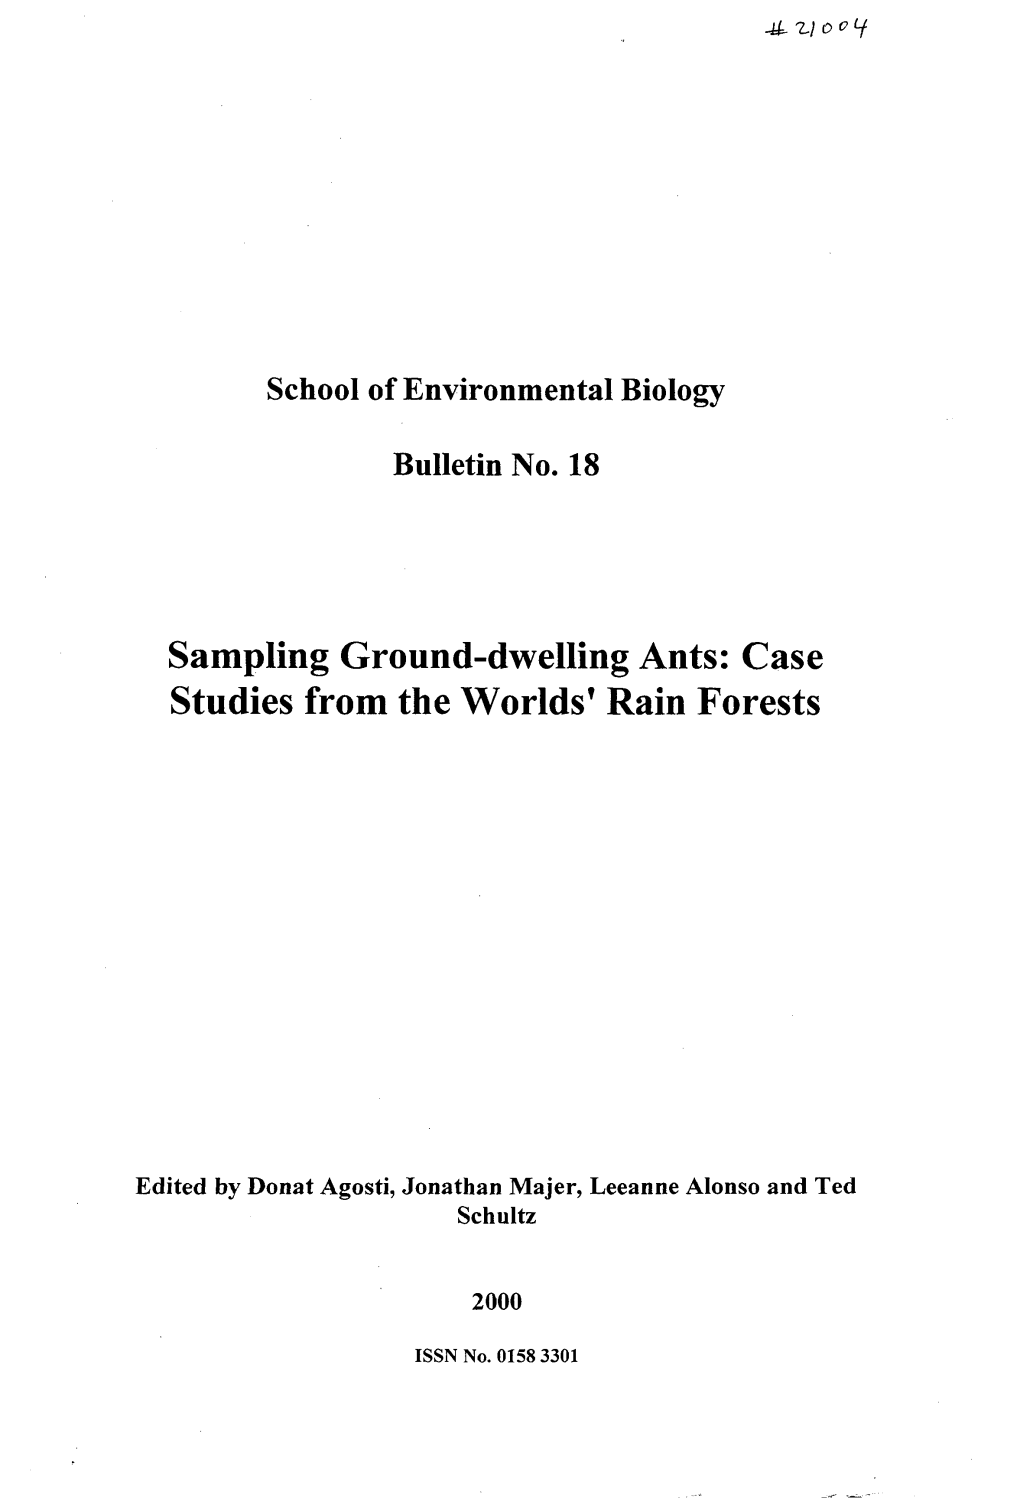 Sampling Ground-Dwelling Ants: Case Studies from the Worlds' Rain Forests